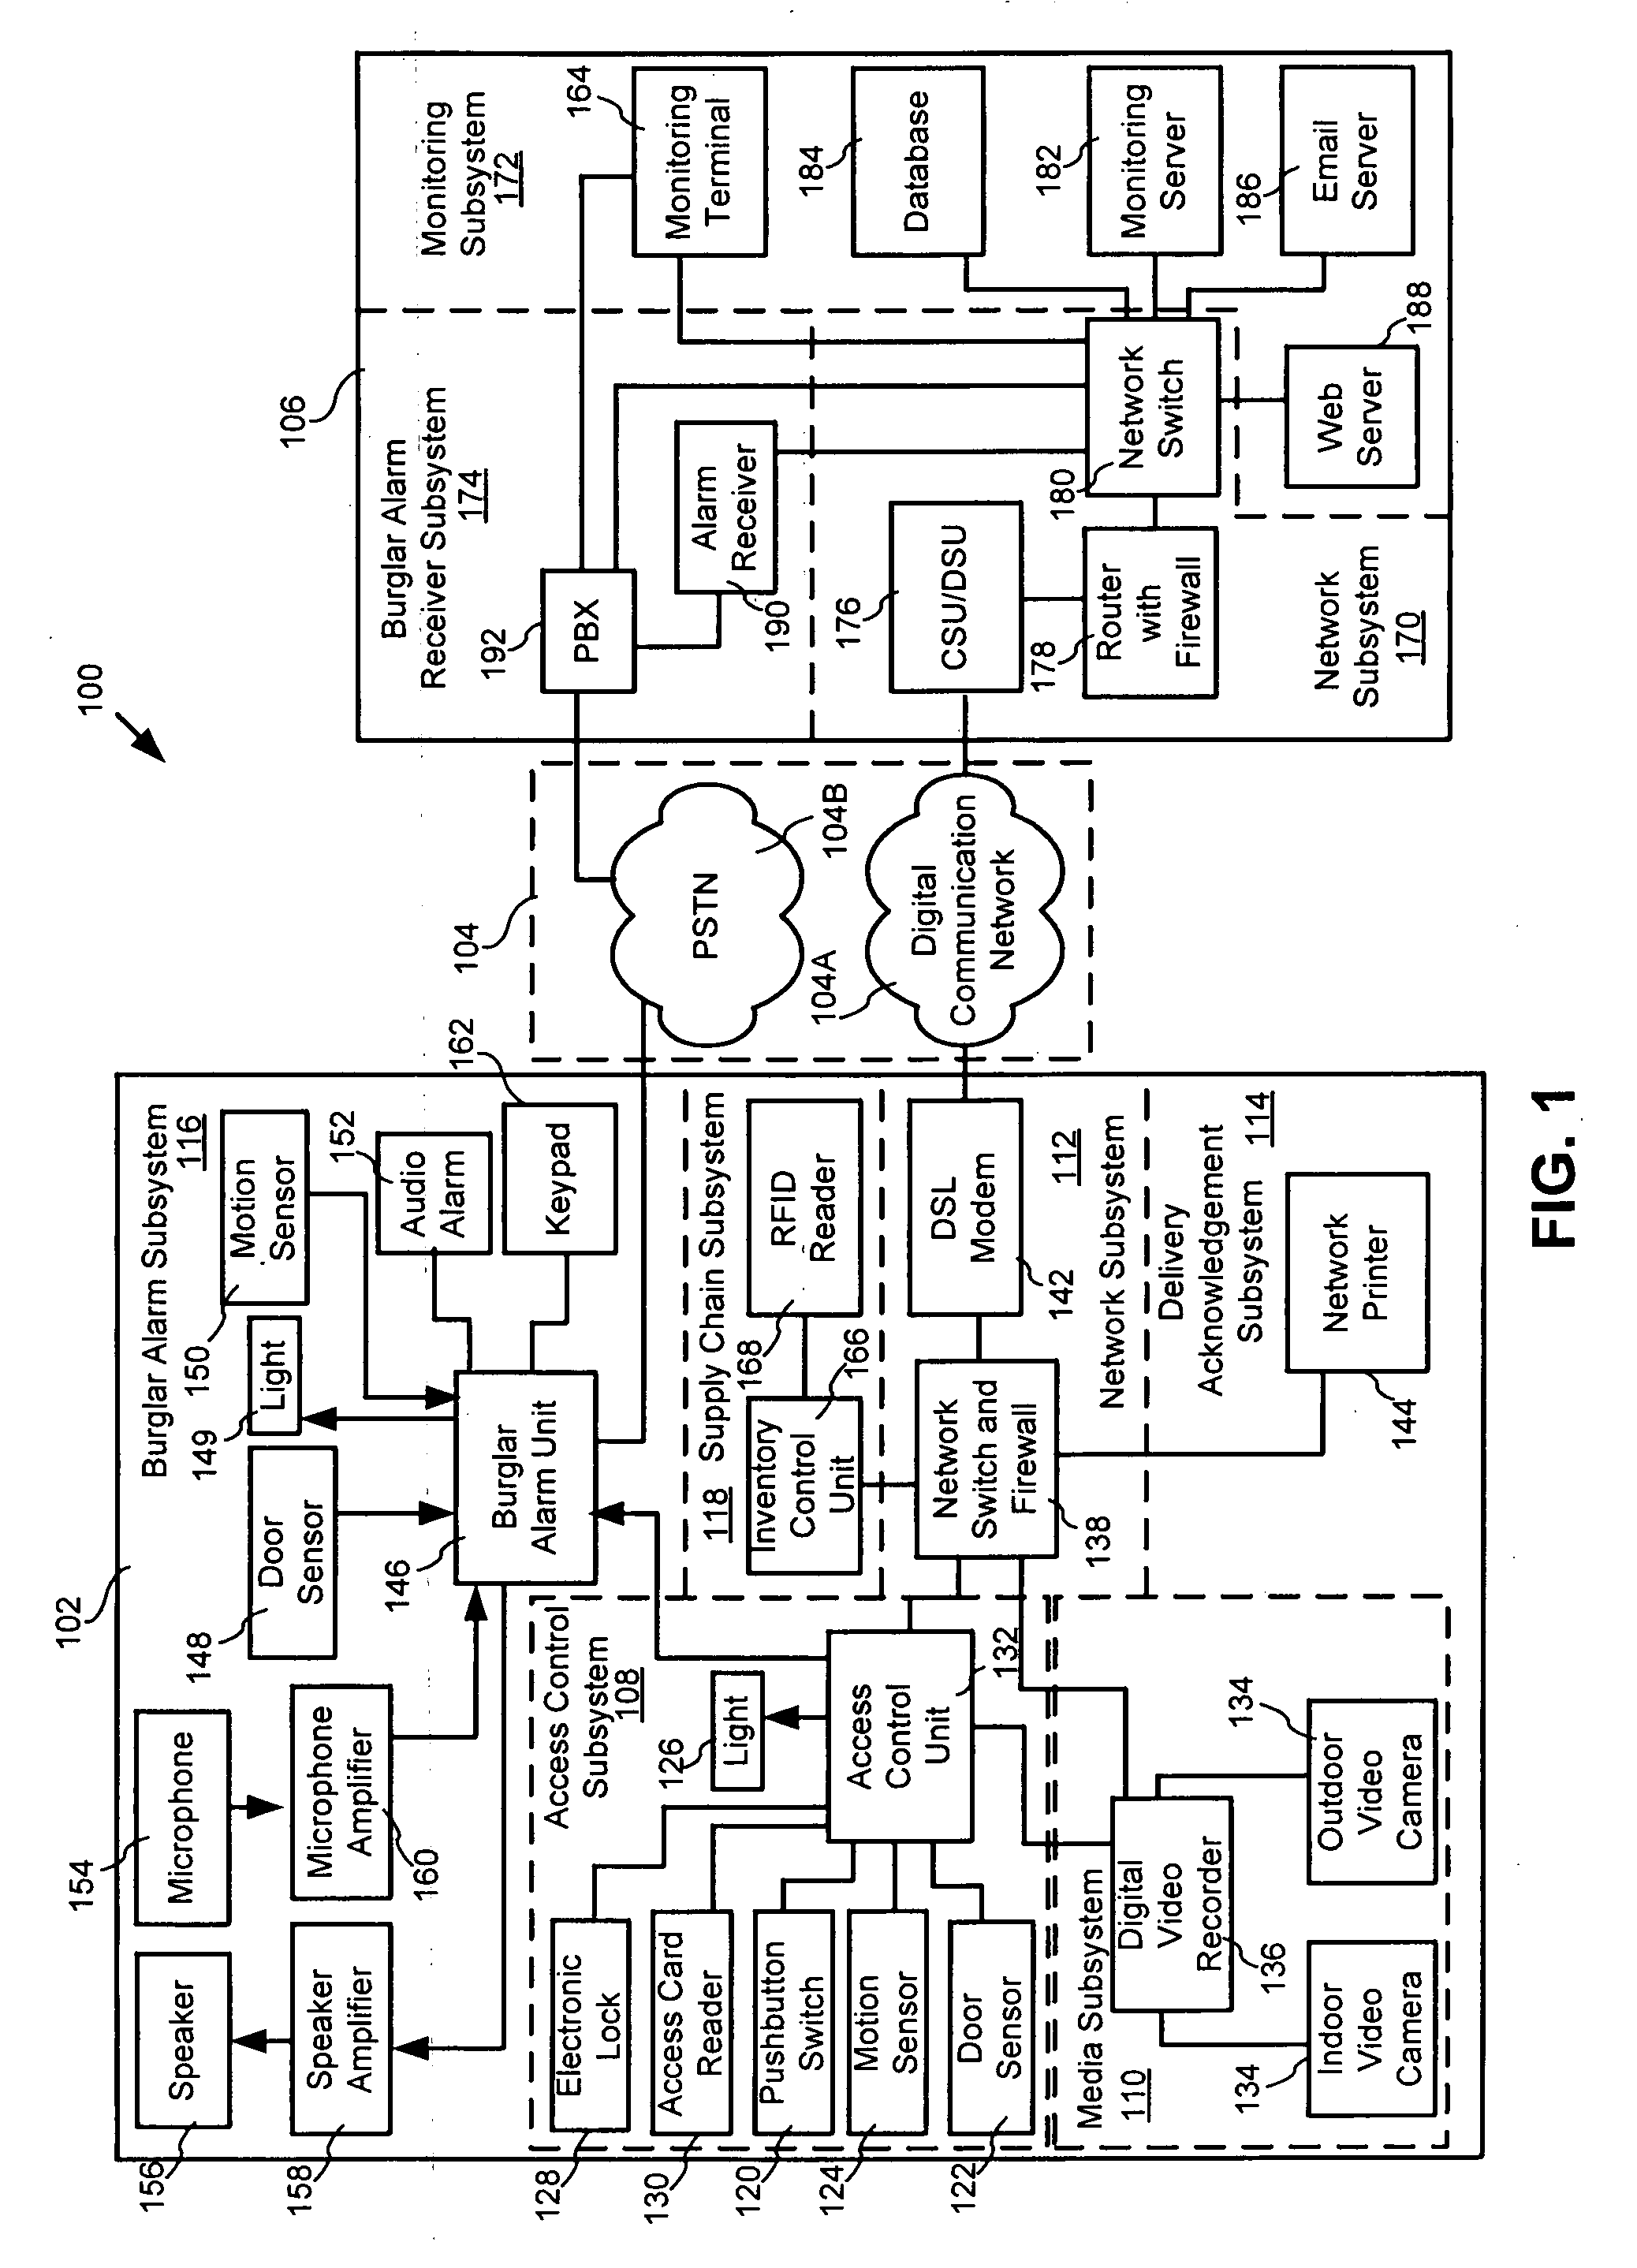 System and method for remotely attended delivery